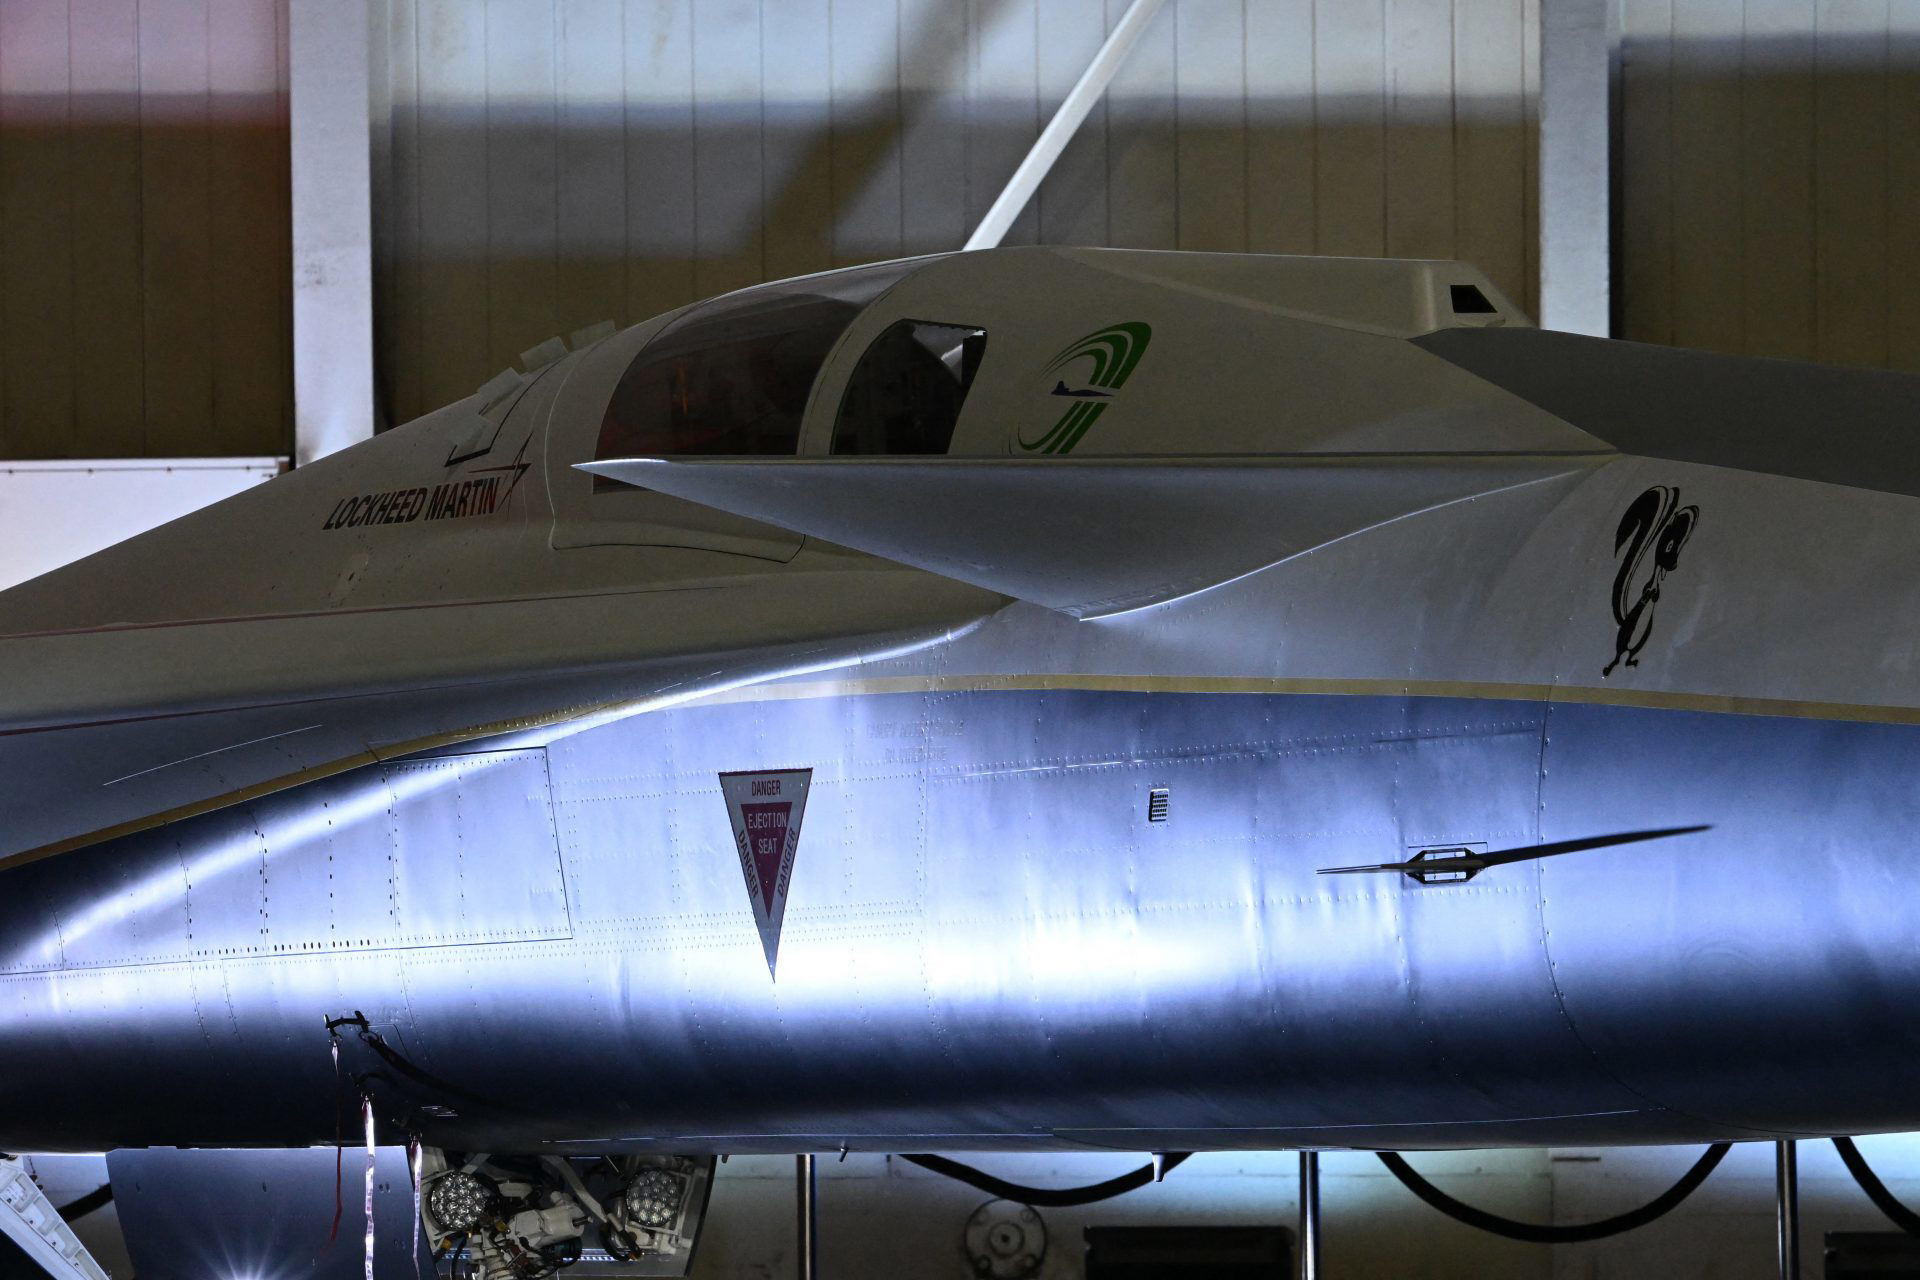 NASA just revealed its new supersonic jet and its awesome